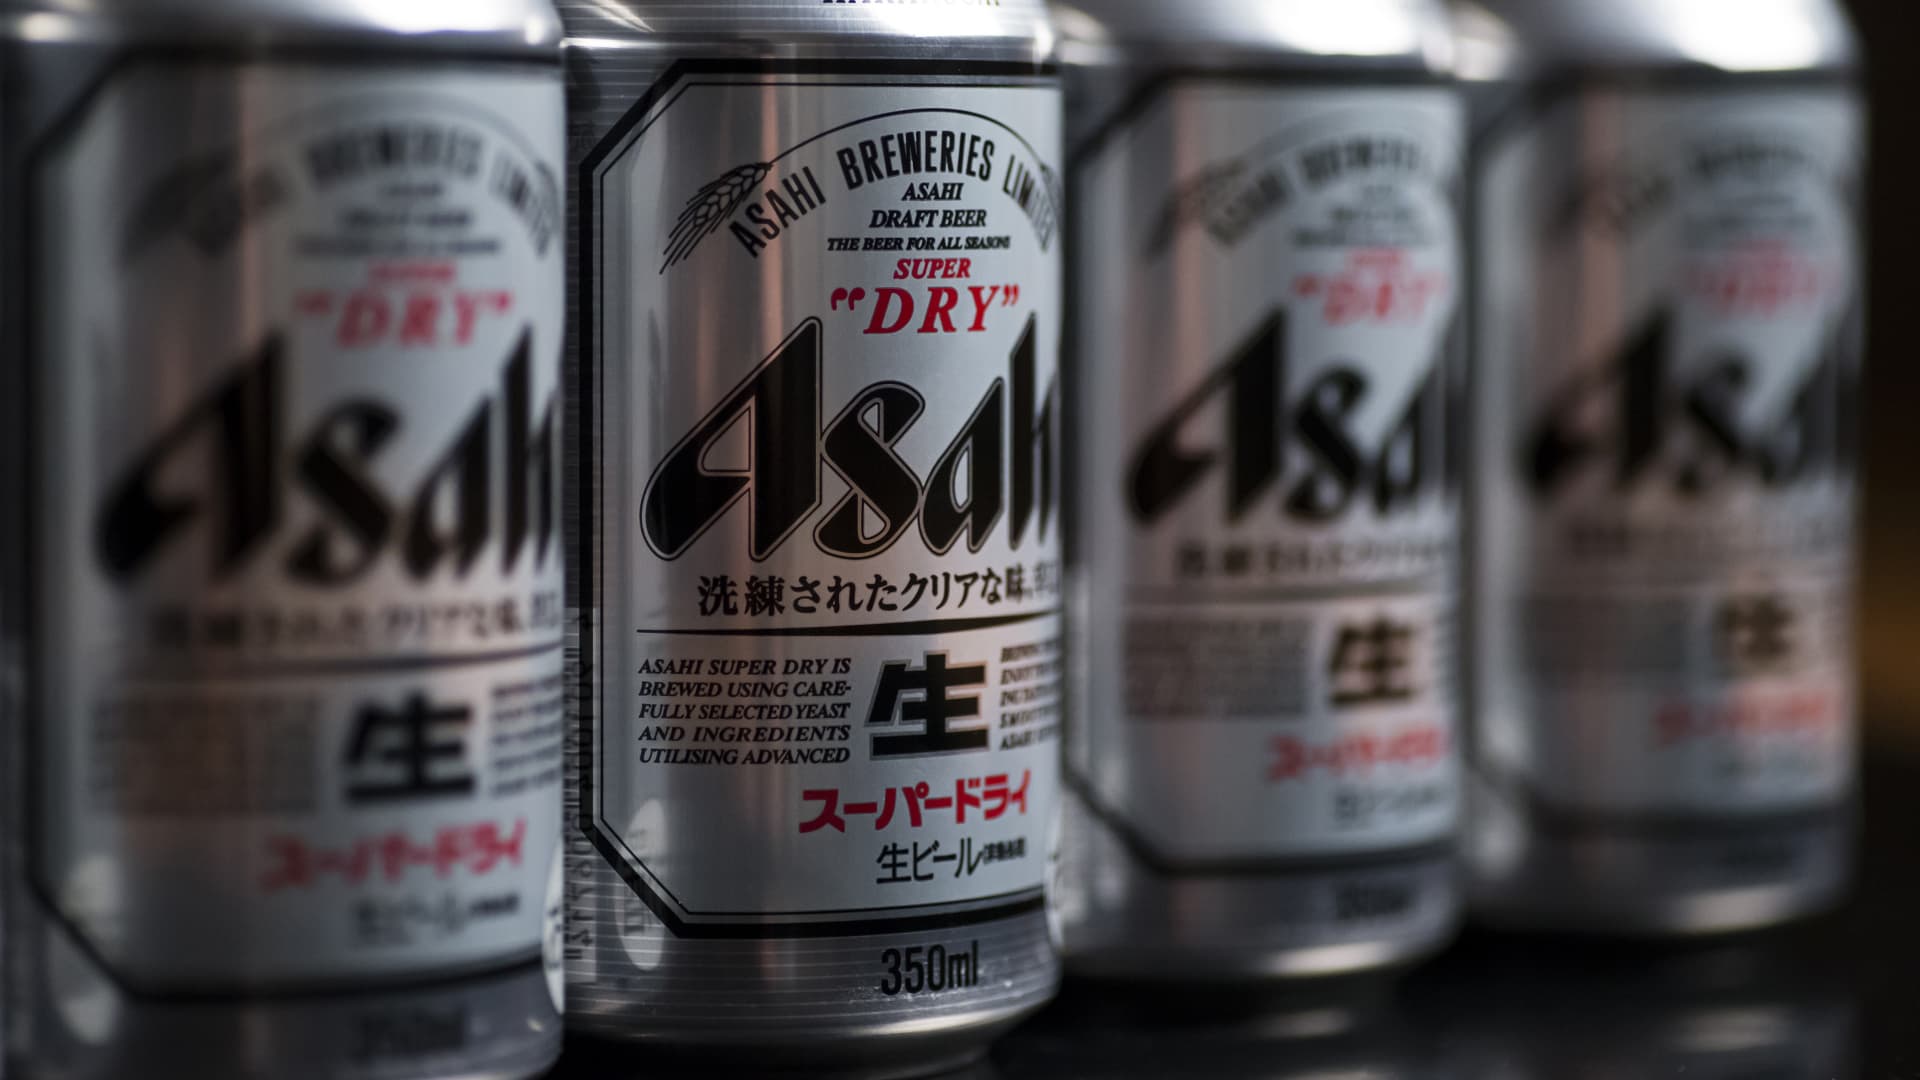 Japan’s largest brewery has China in its sights again